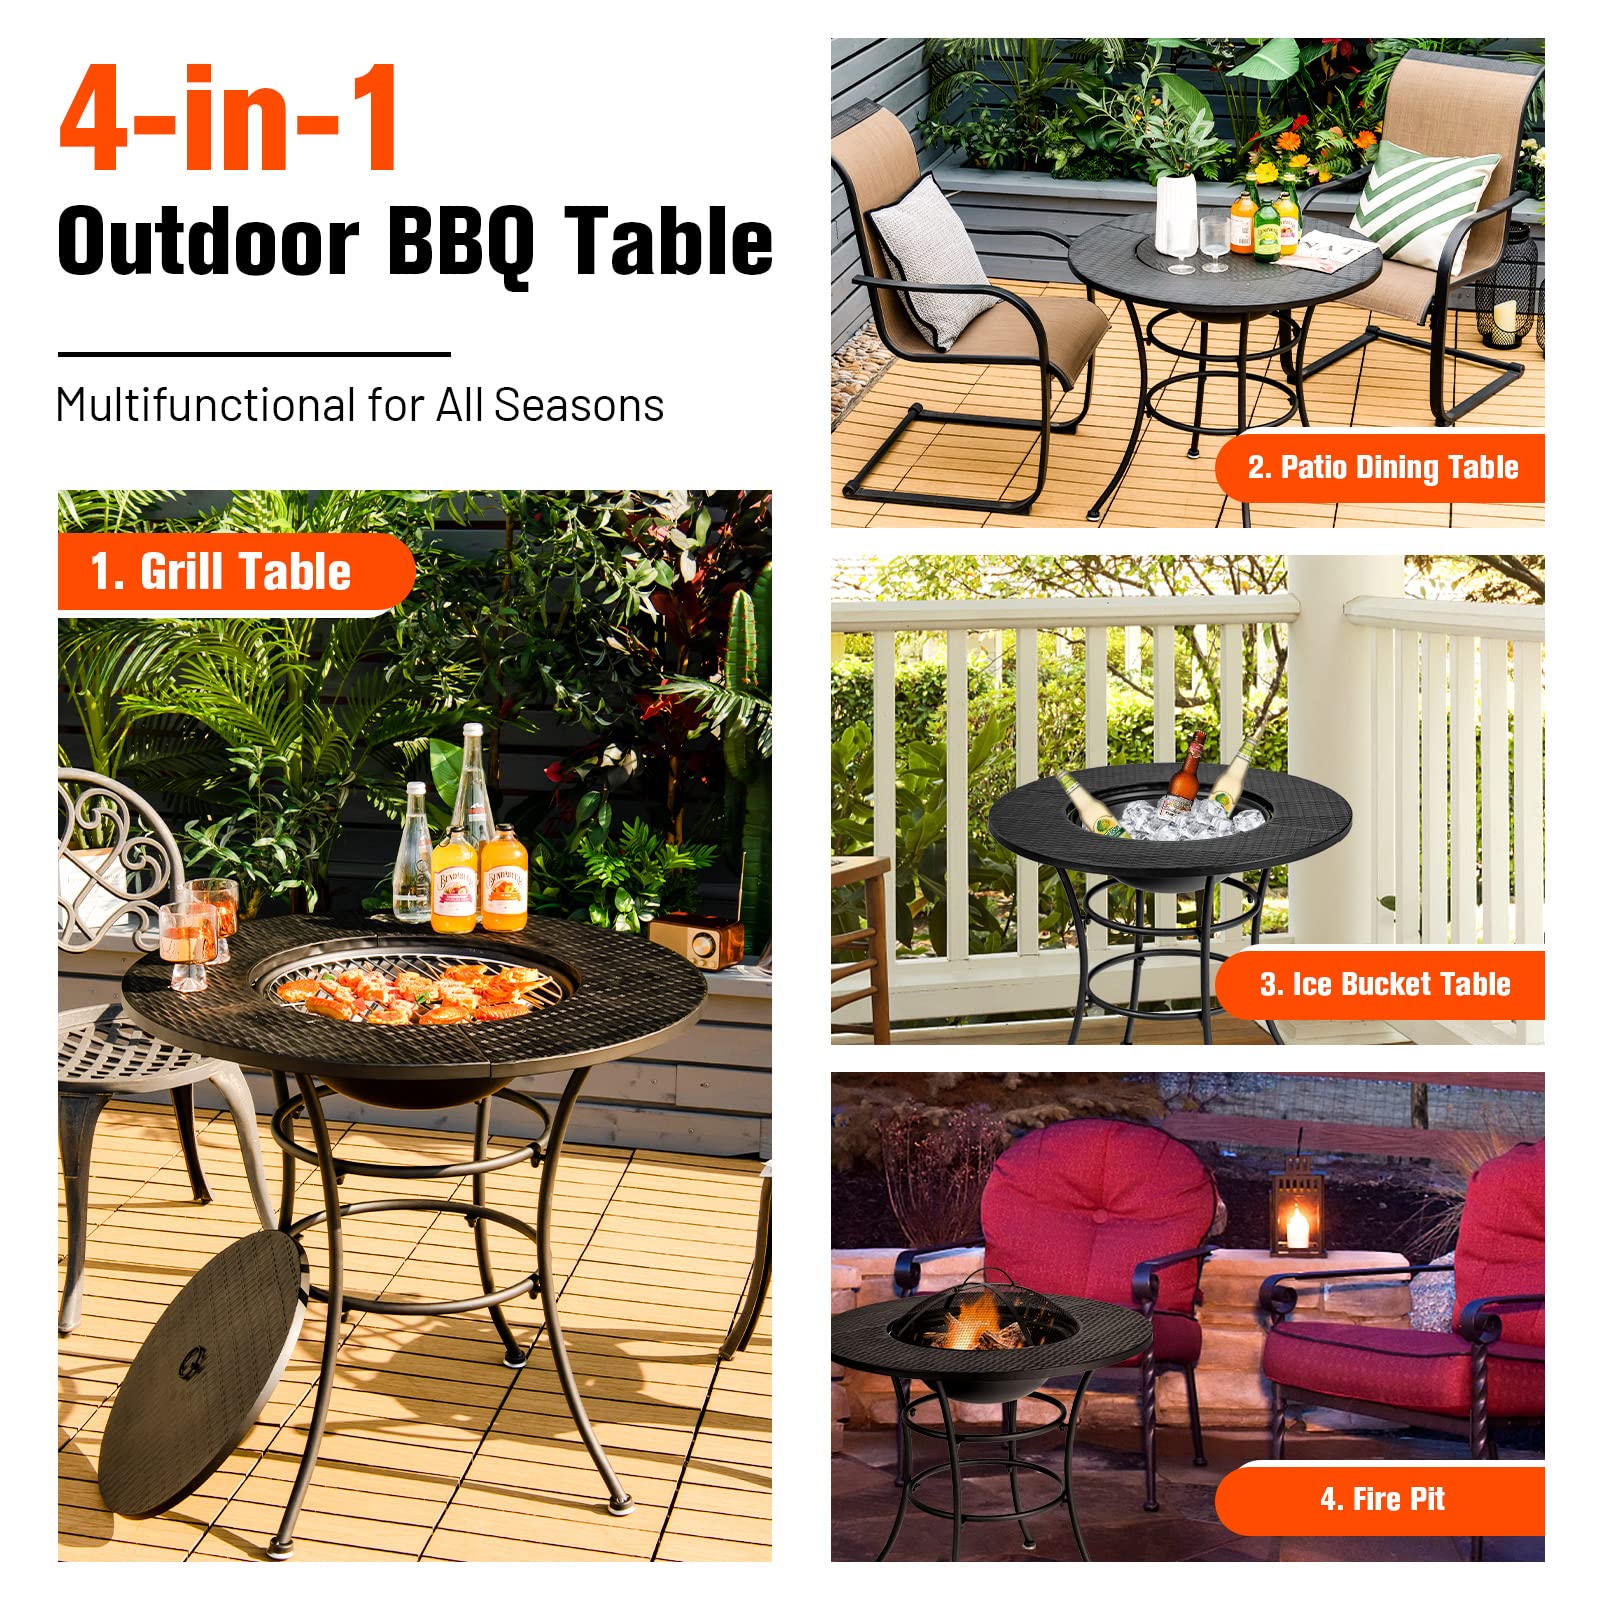 Tangkula 32 Inch Outdoor Fire Pit Dining Table, 4-in-1 Round Wood Burning Fire Pit Bowl, Patio Steel Firepit for BBQ, Bonfire, Camping, Includes Fire Poker, Cover, Grill, Log Grate, Spark Screen Cover